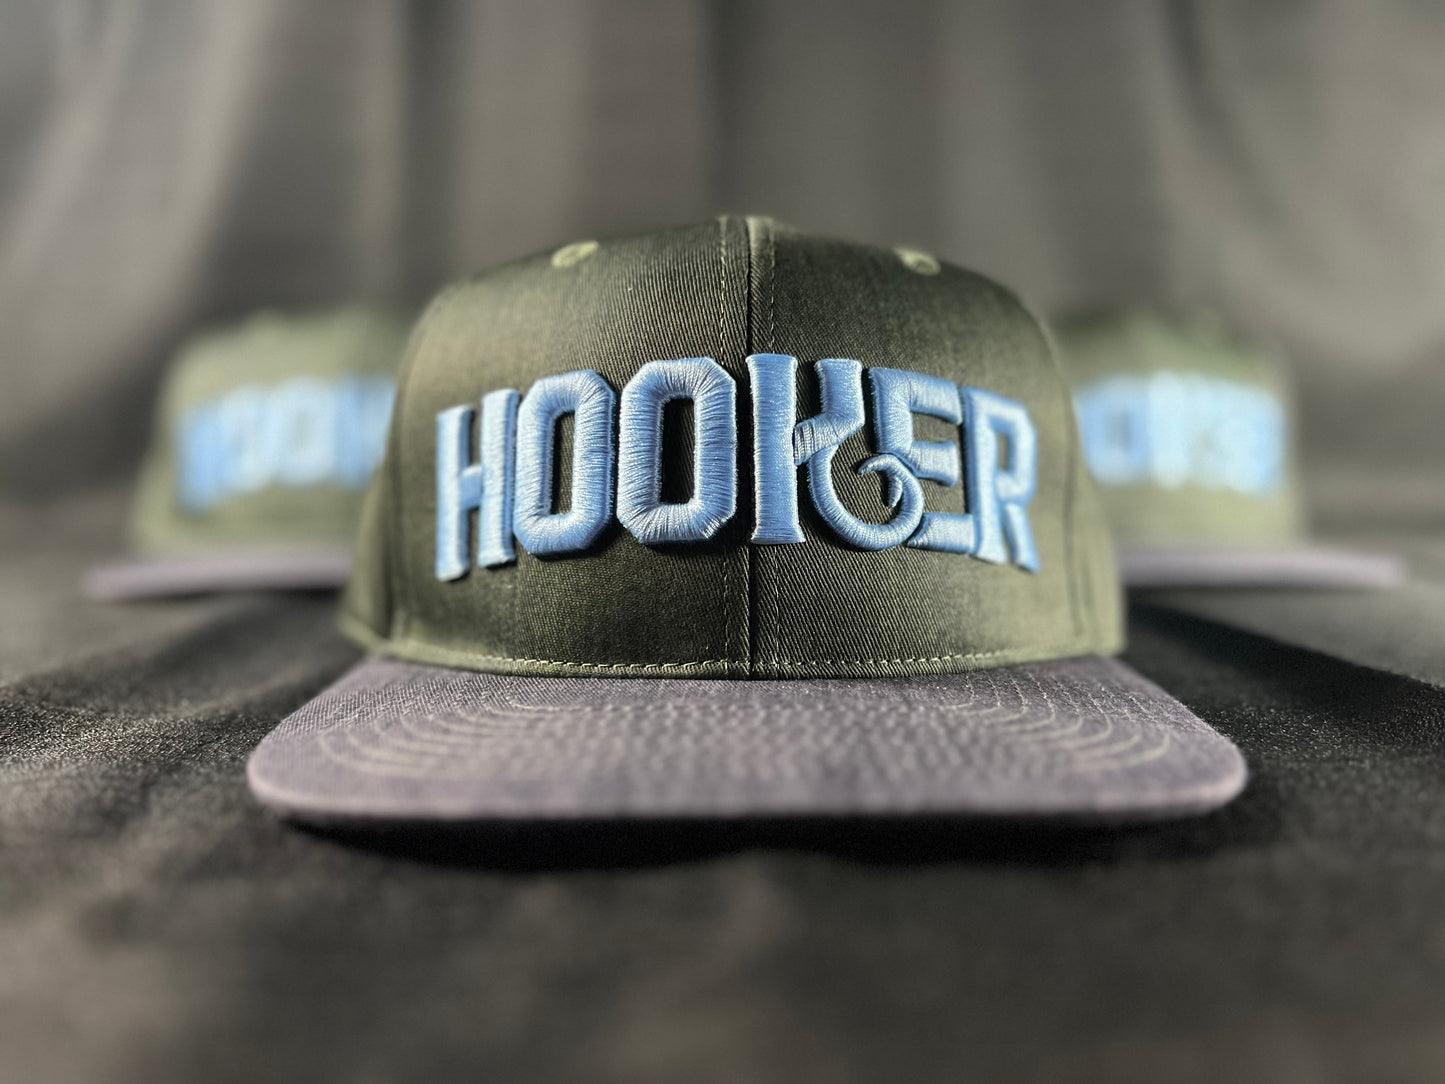 HOOKER Snap Back Collection.